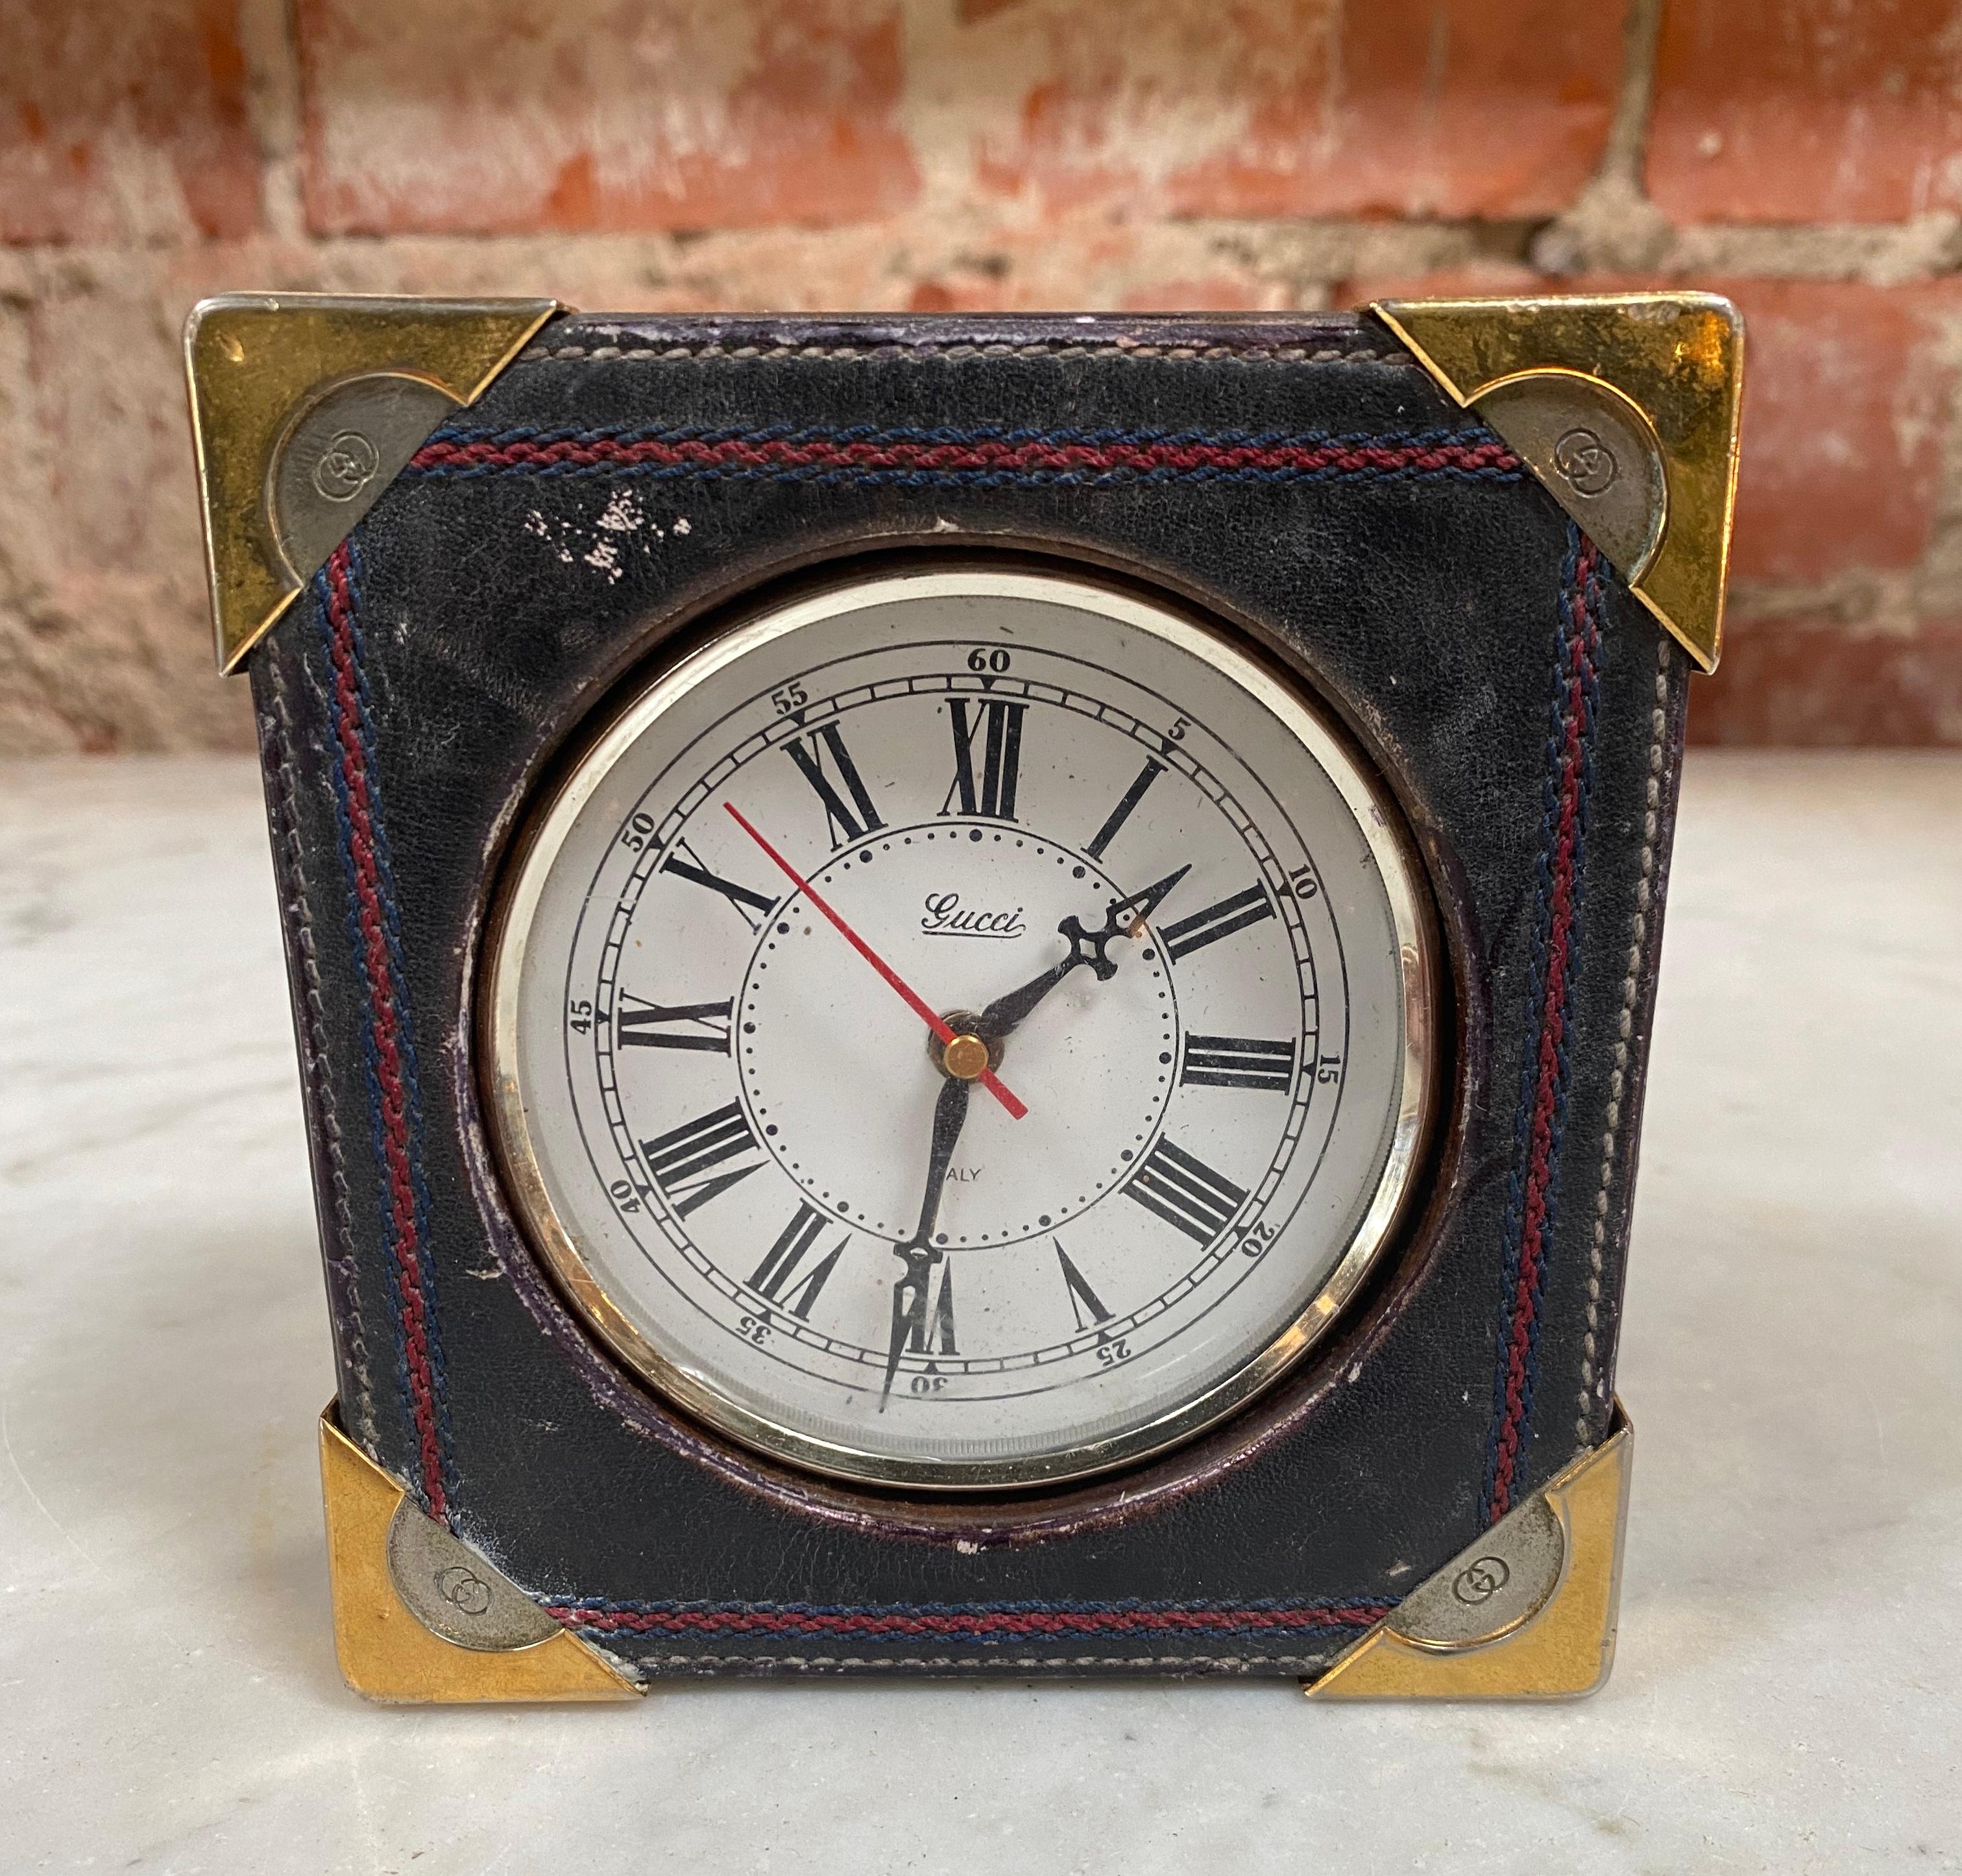 Elegant vintage Gucci table clock made in leather wood and bras, marked with Gucci.
 